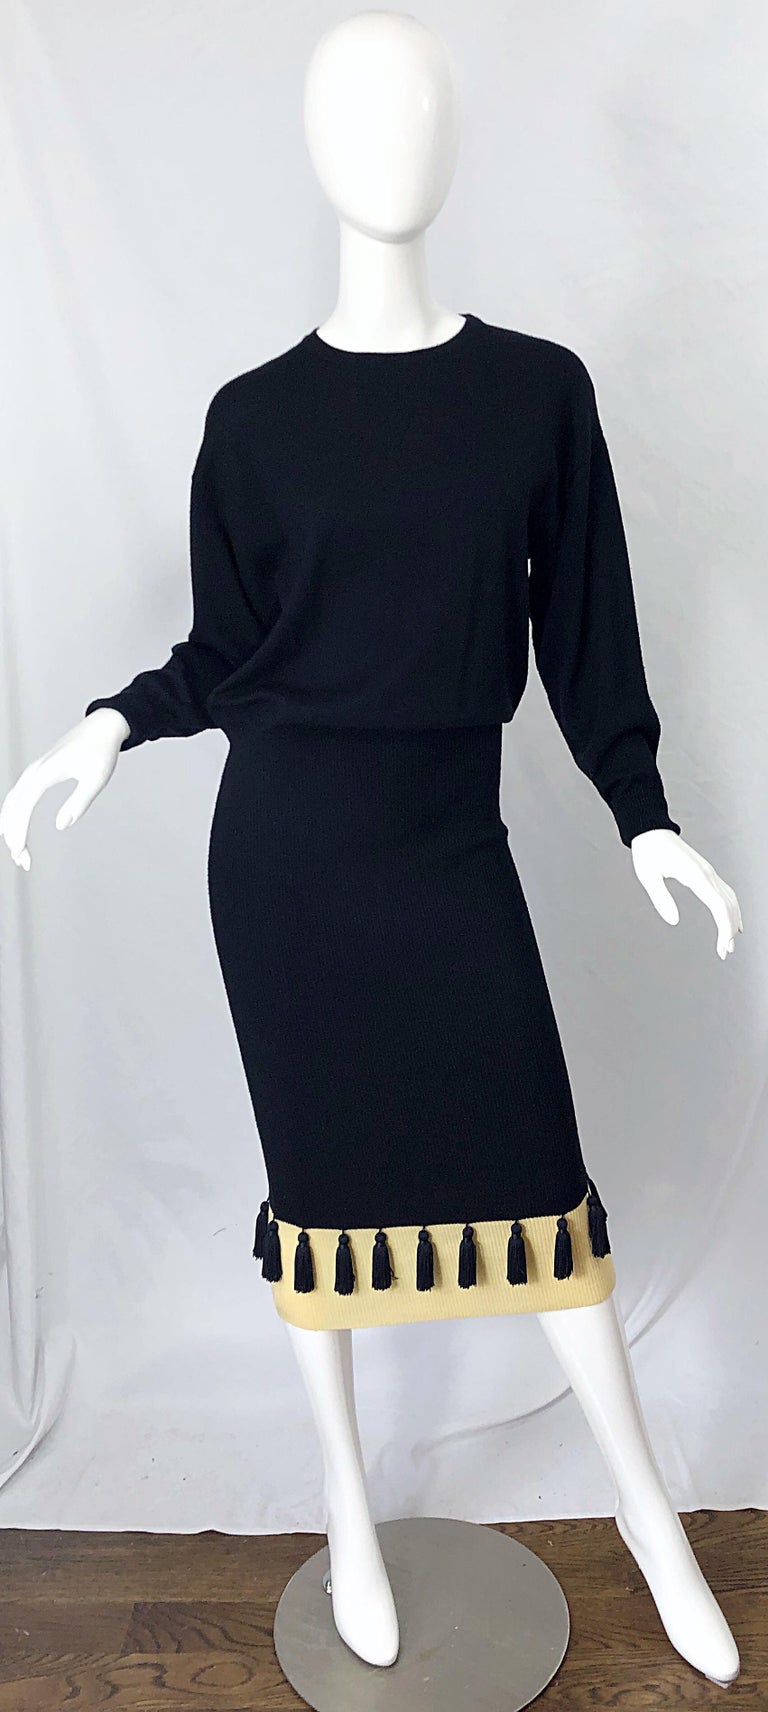 1980s Angelo Tarlazzi Black and Ivory Wool Dolman Sleeve 80s Sweater Dress For Sale 11